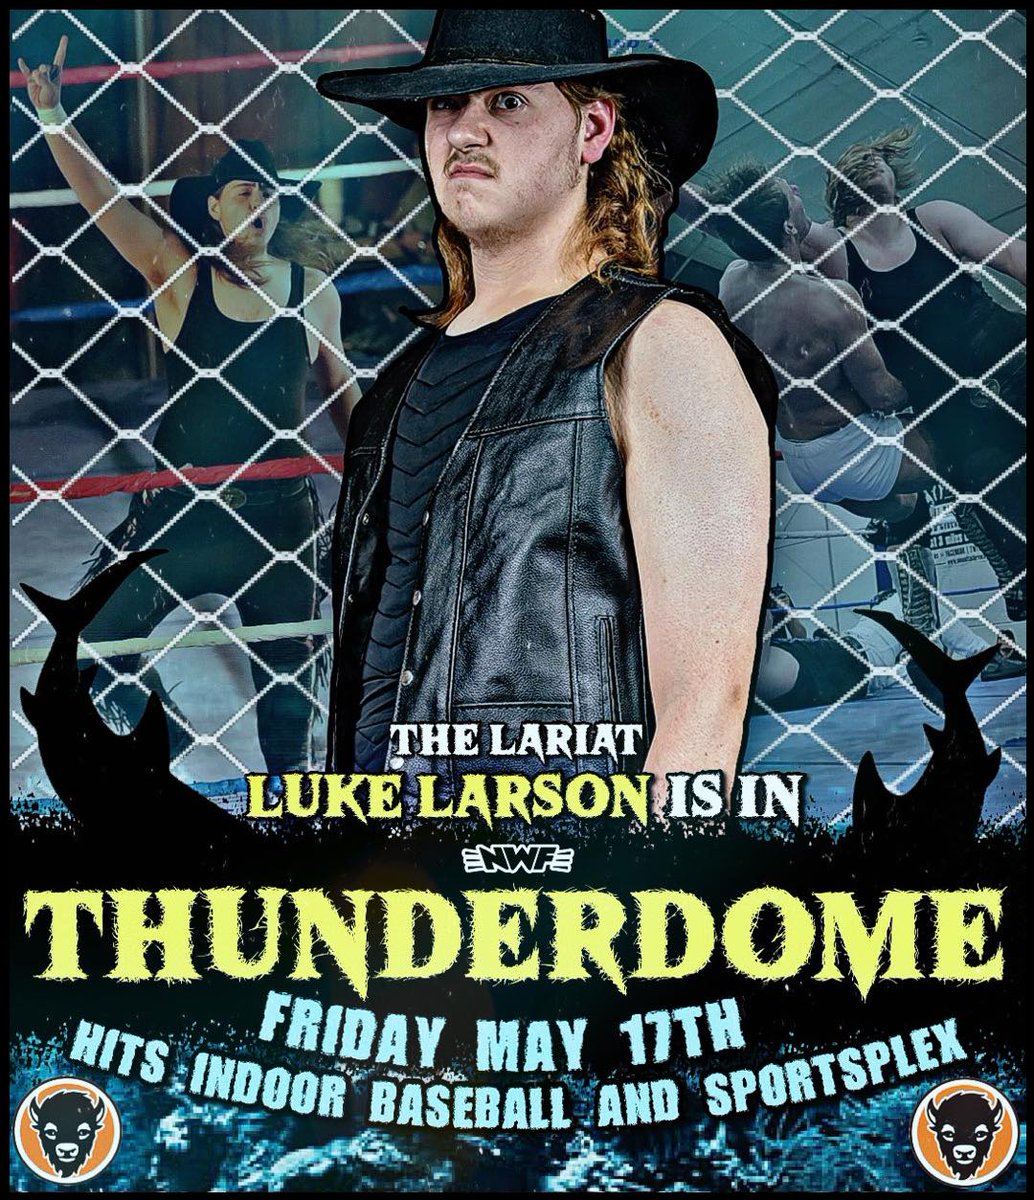 🚨 LUKE LARSON HAS BEEN ENTERED IN THUNDERDOME! 🚨 After losing his Unified title last night, @LukeLarsonPro looks to claim another title on May 17th at Hits Indoor Baseball: the NWF Heavyweight Championship! 🎟: nwfwrestling.com/events 🚪: 6:30 pm 🔔: 7:30 pm